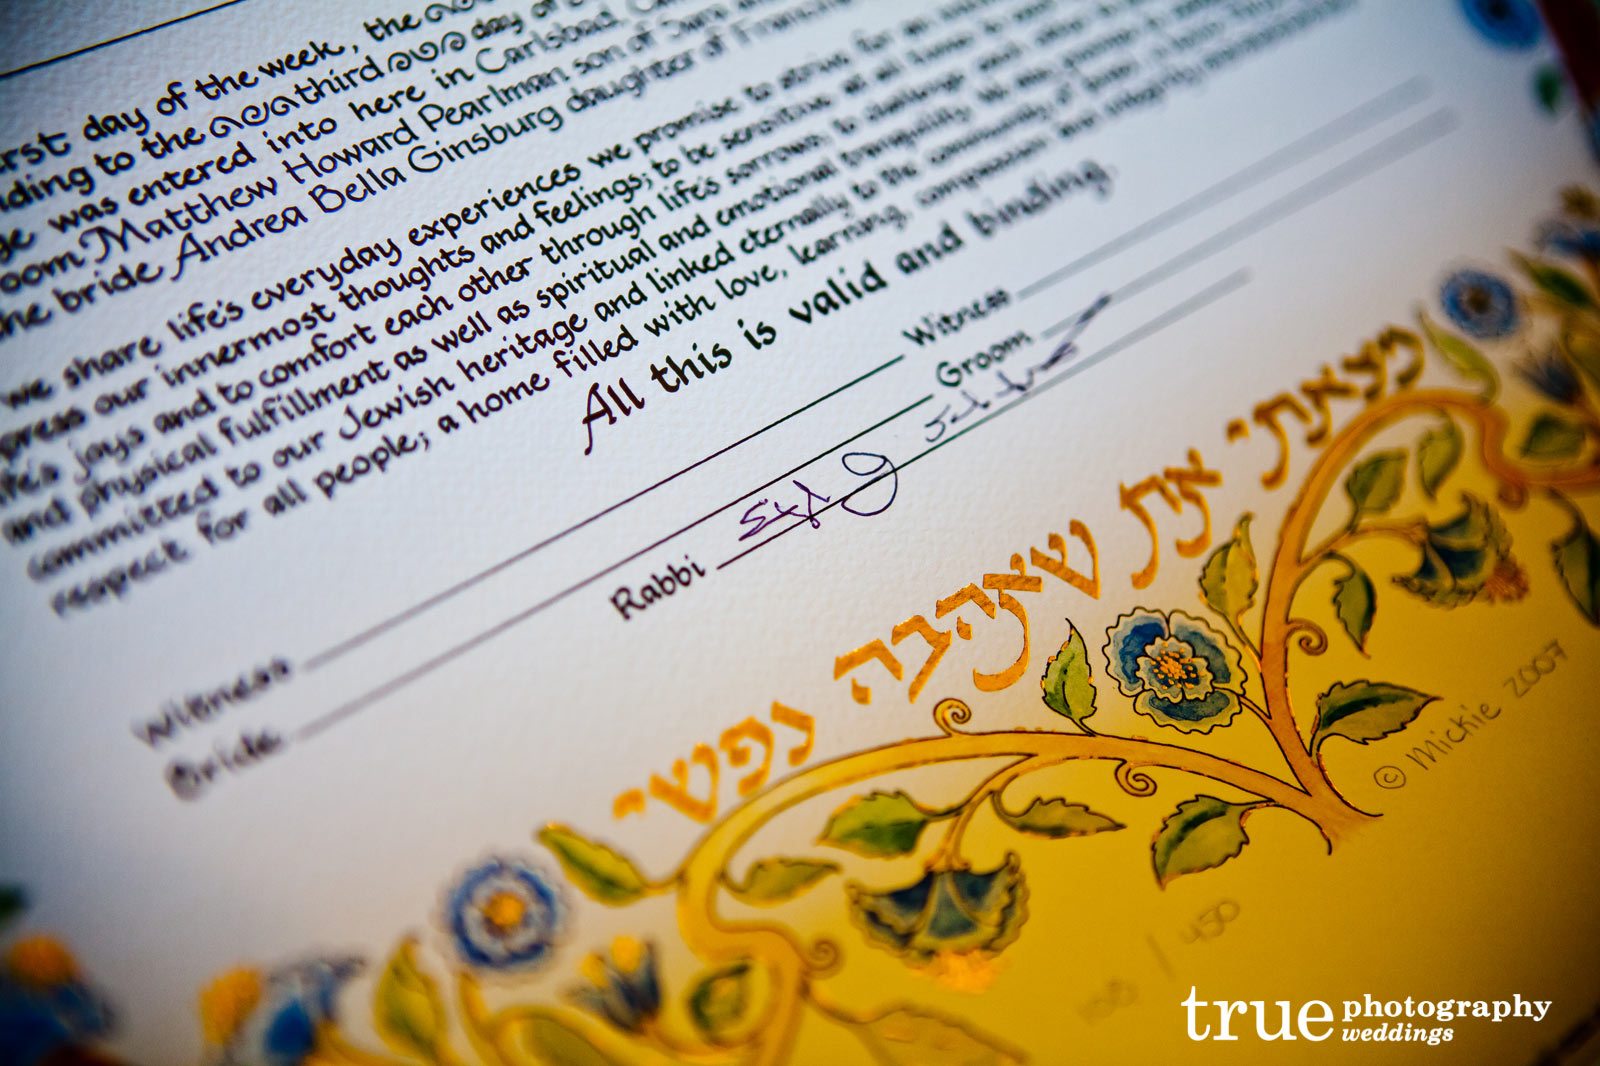 Photographing The Jewish Wedding Ketubah Marriage Contract